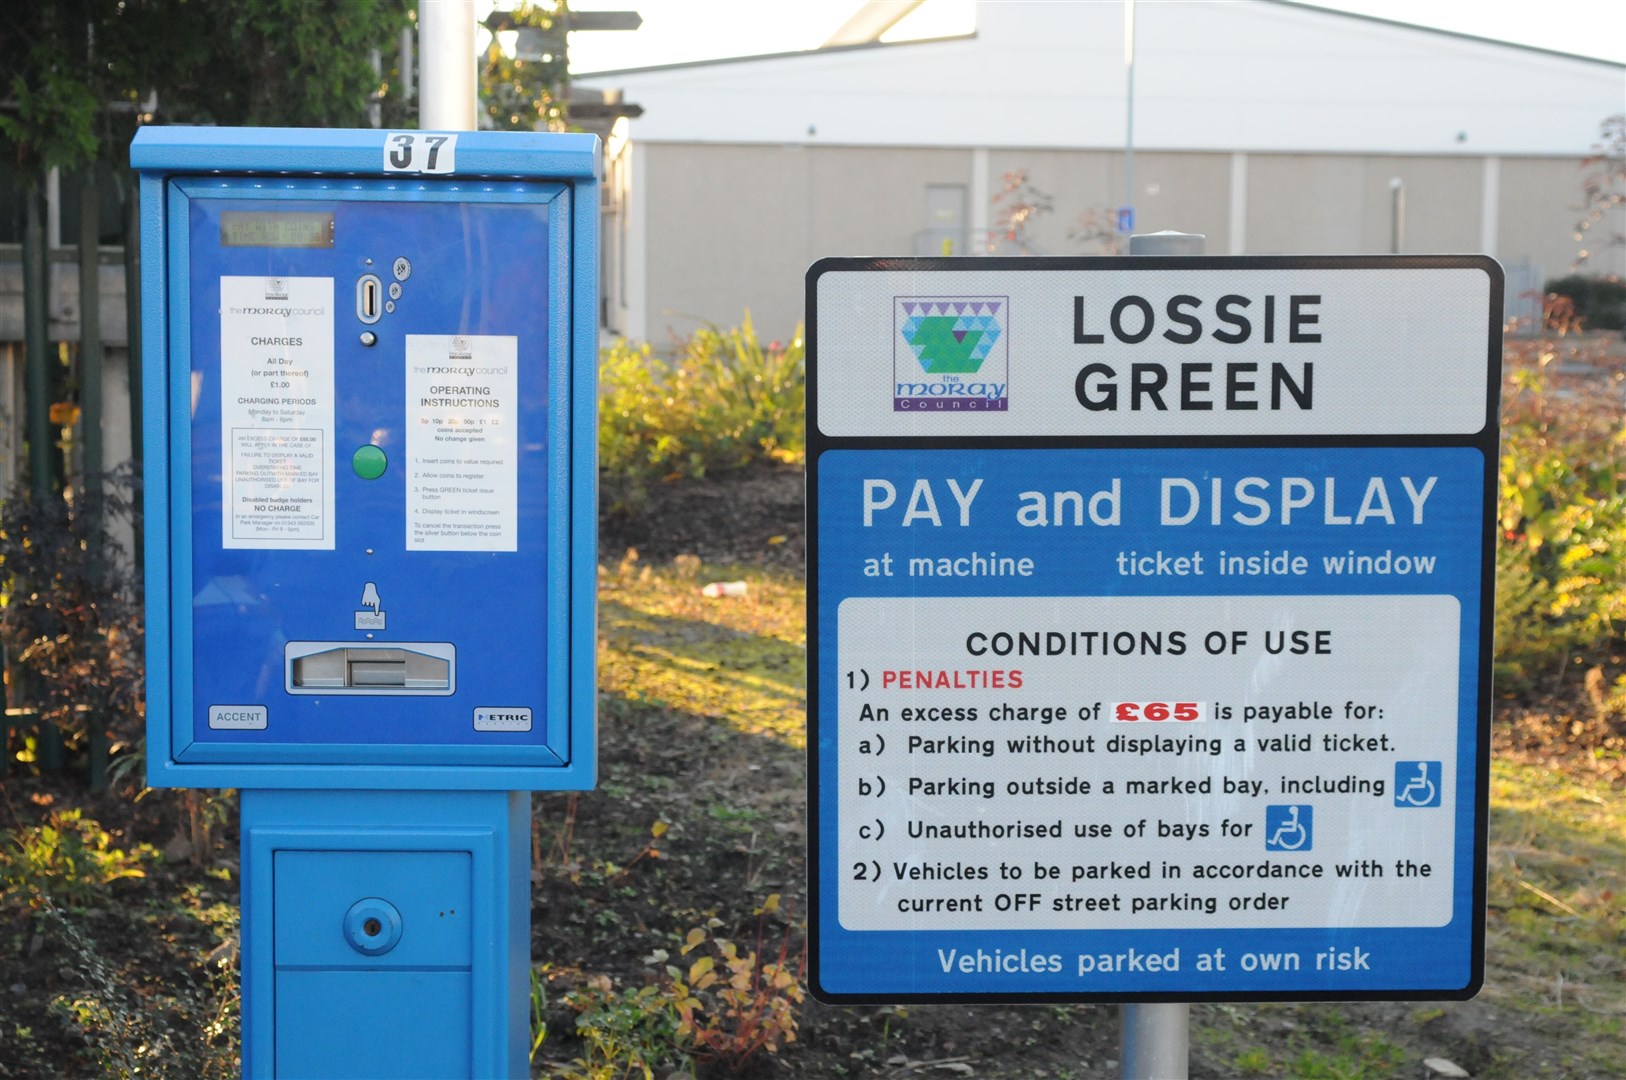 The parking charges will double at Lossie Green car park.